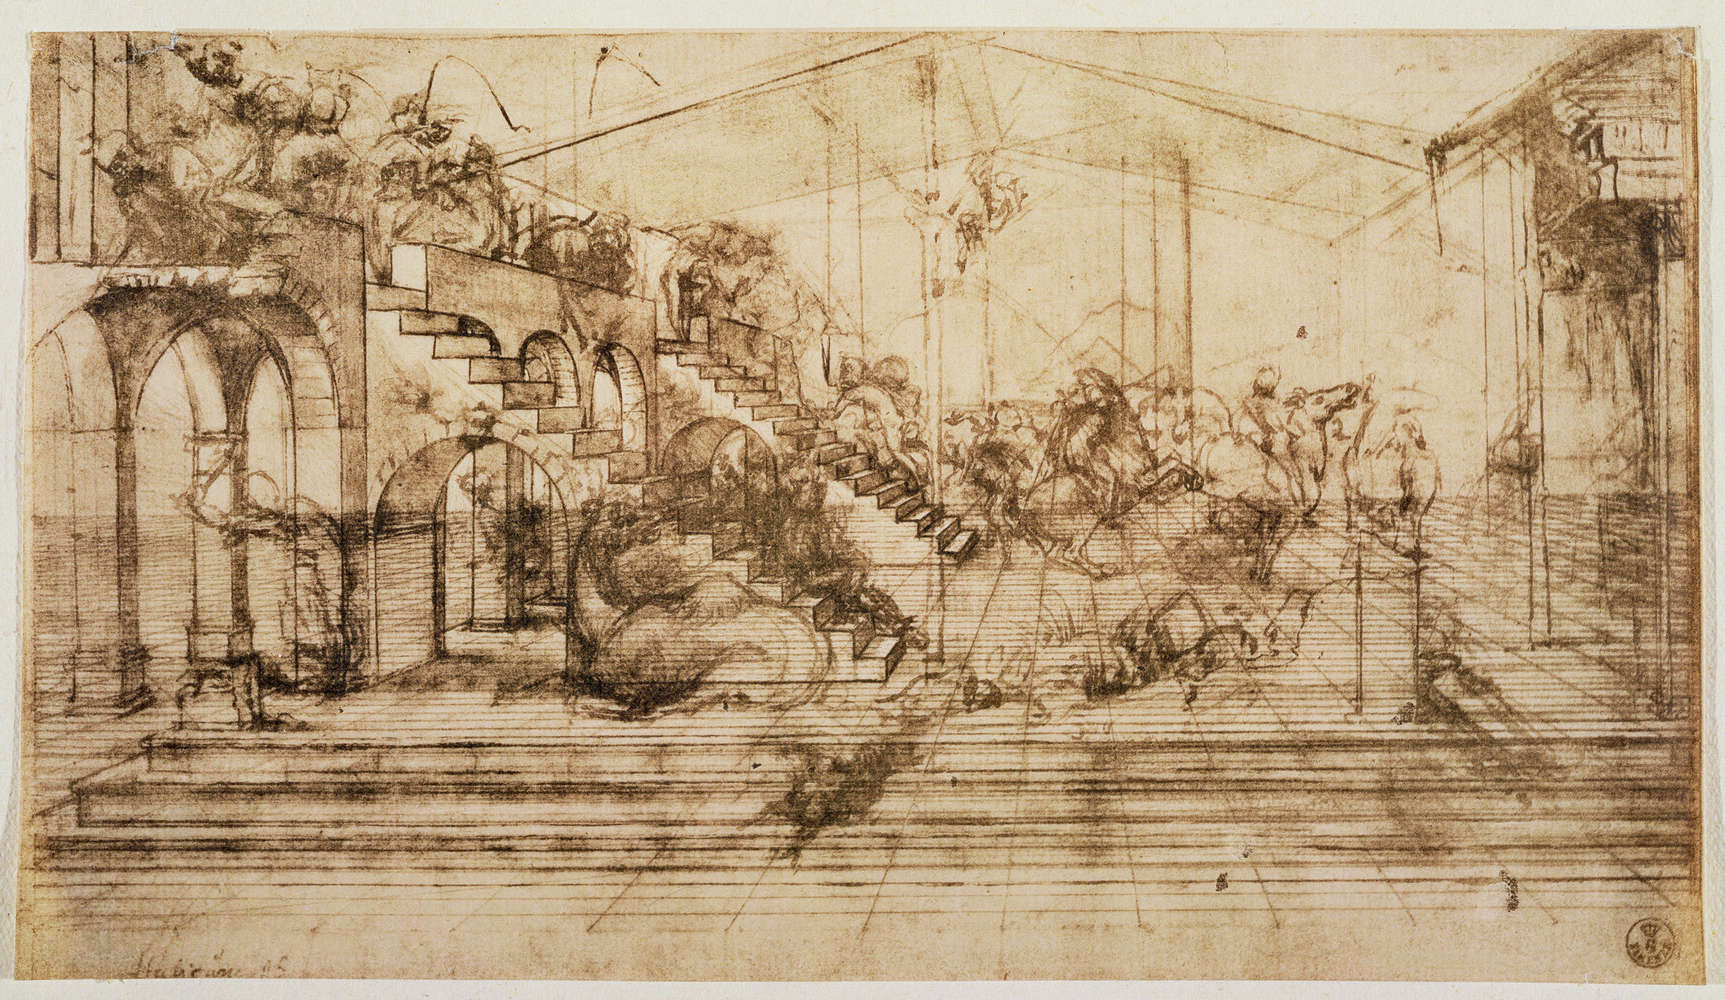             Photo wallpaper "Perspective study for the background of the Adoration of the Magi" by Leonardo da Vinci
        